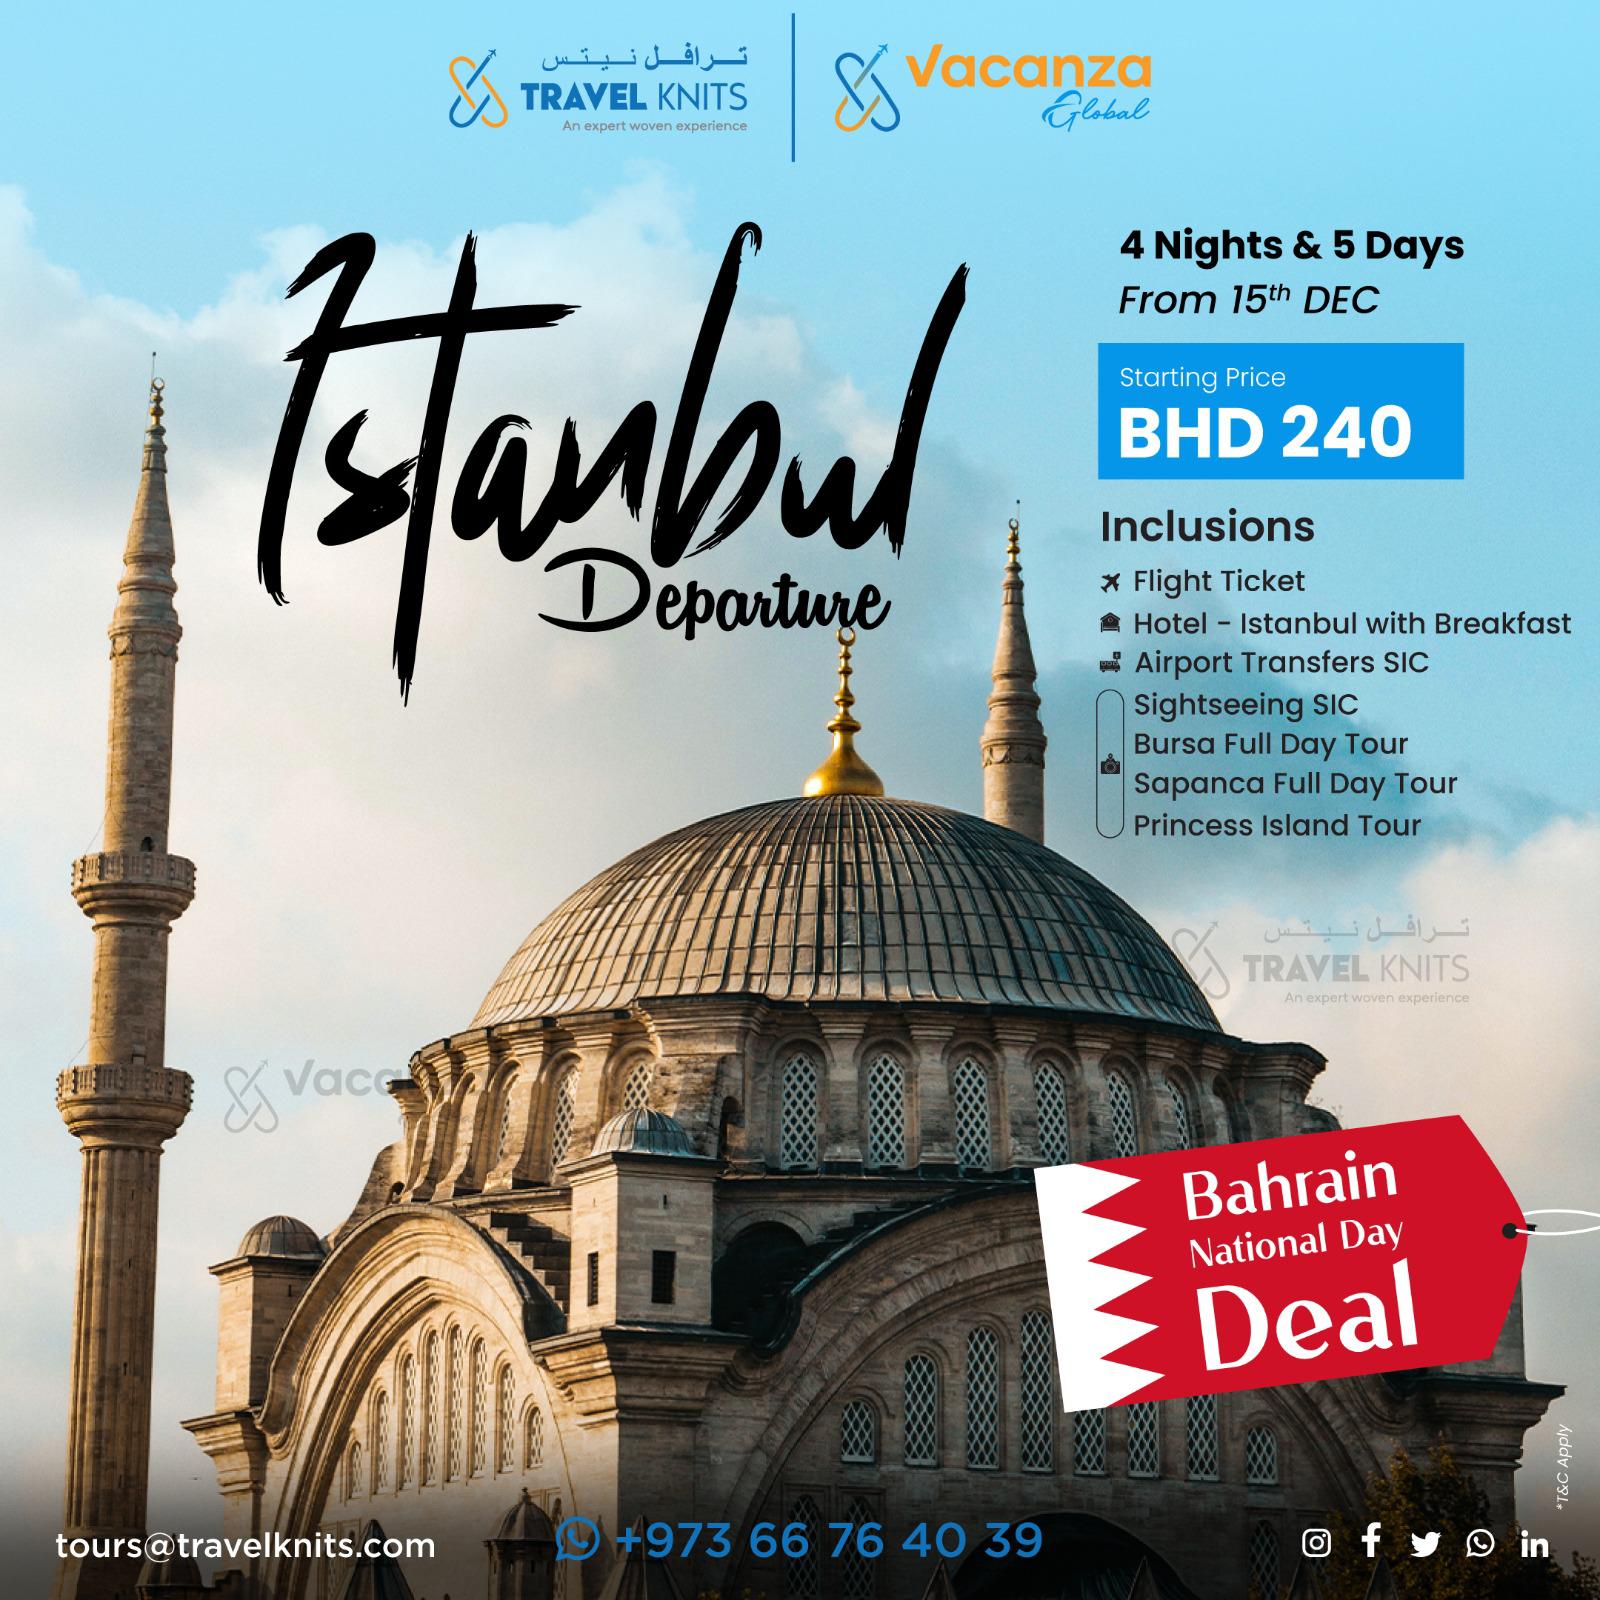 Istanbul bahrain national dayTour Packages - Book honeymoon ,family,adventure tour packages to Istanbul bahrain national day|Travel Knits